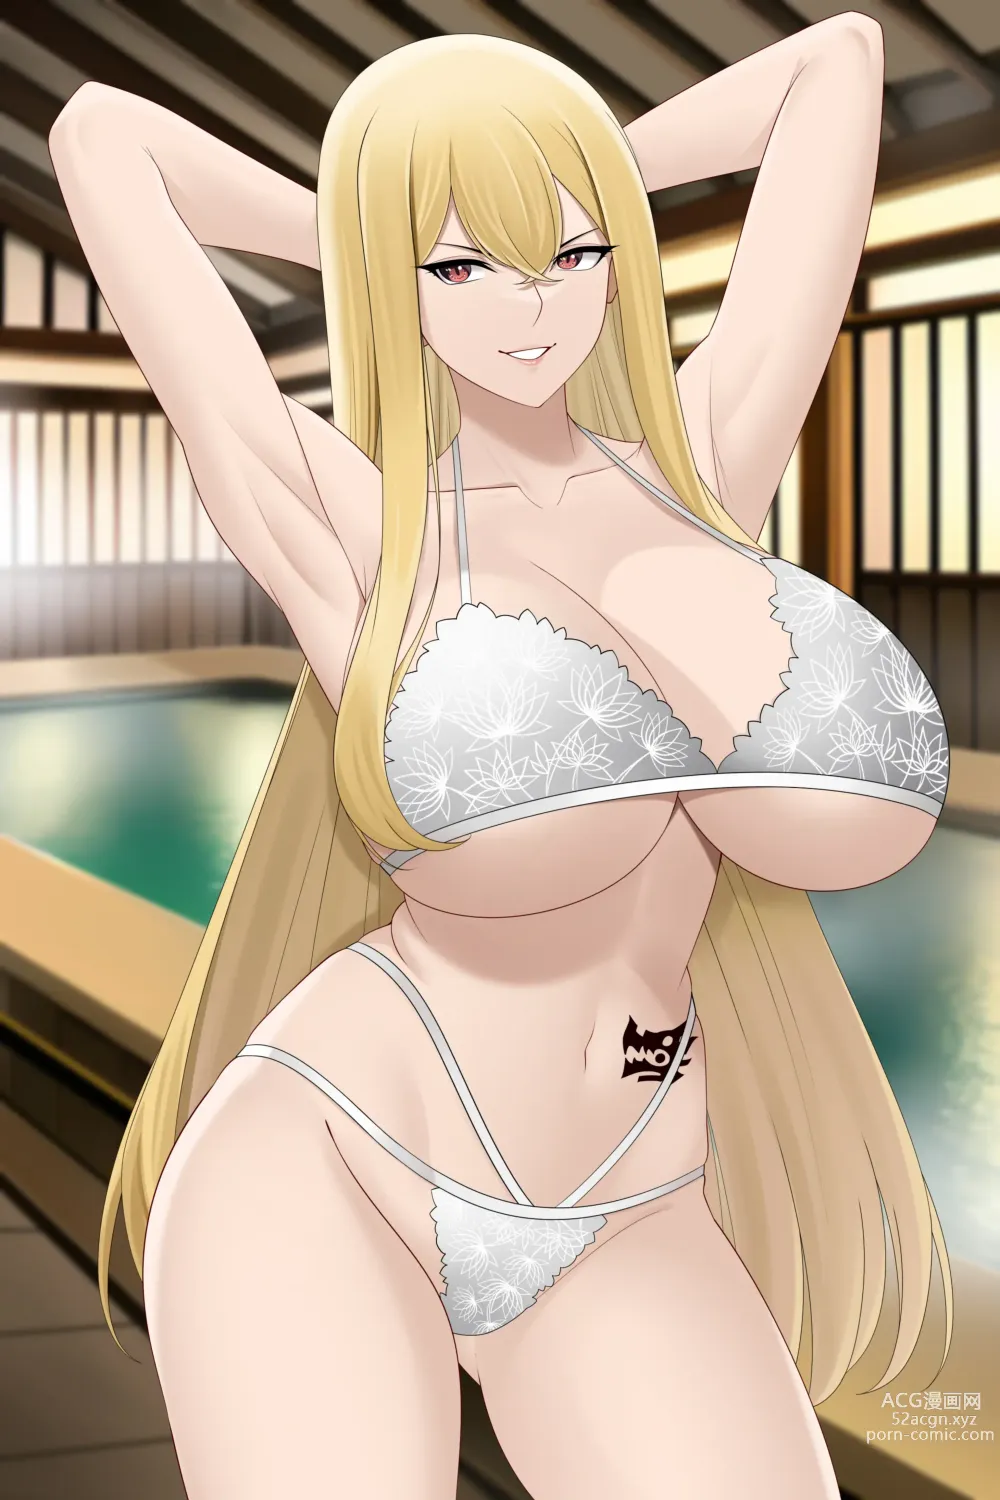 Page 1 of imageset Fairy Tail girls sexy lingerie